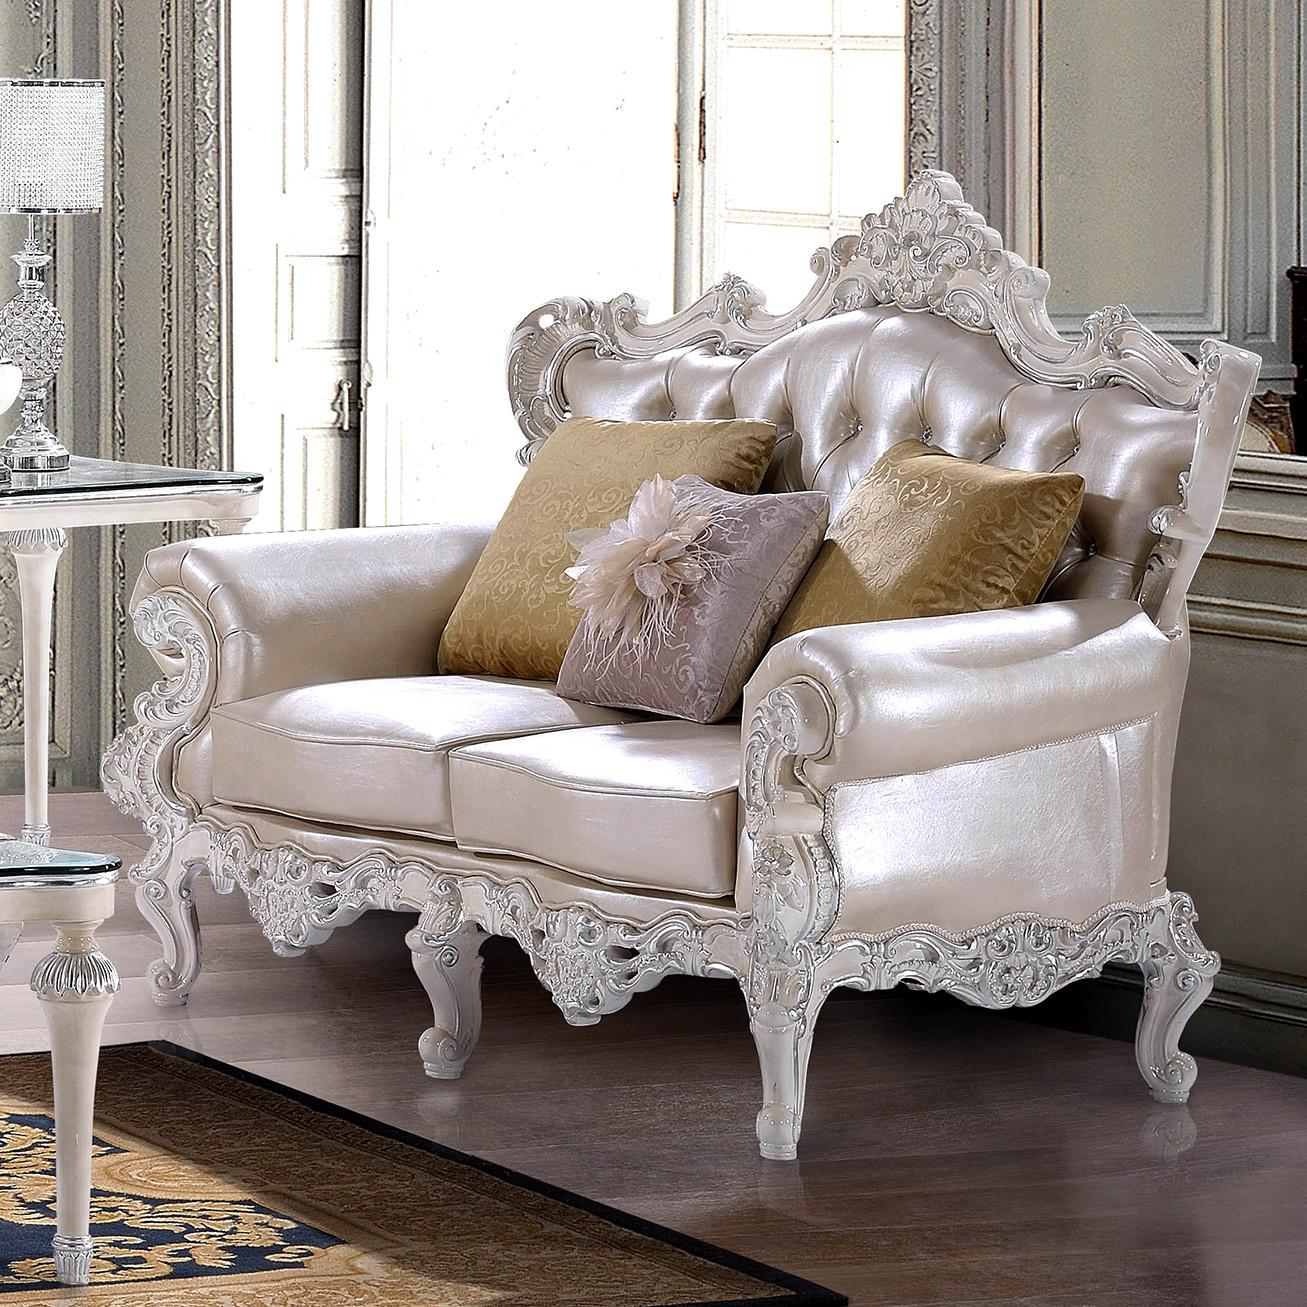 

    
Luxury Pearl Cream Tufted Loveseat Carved Wood Traditional Homey Design HD-13009
